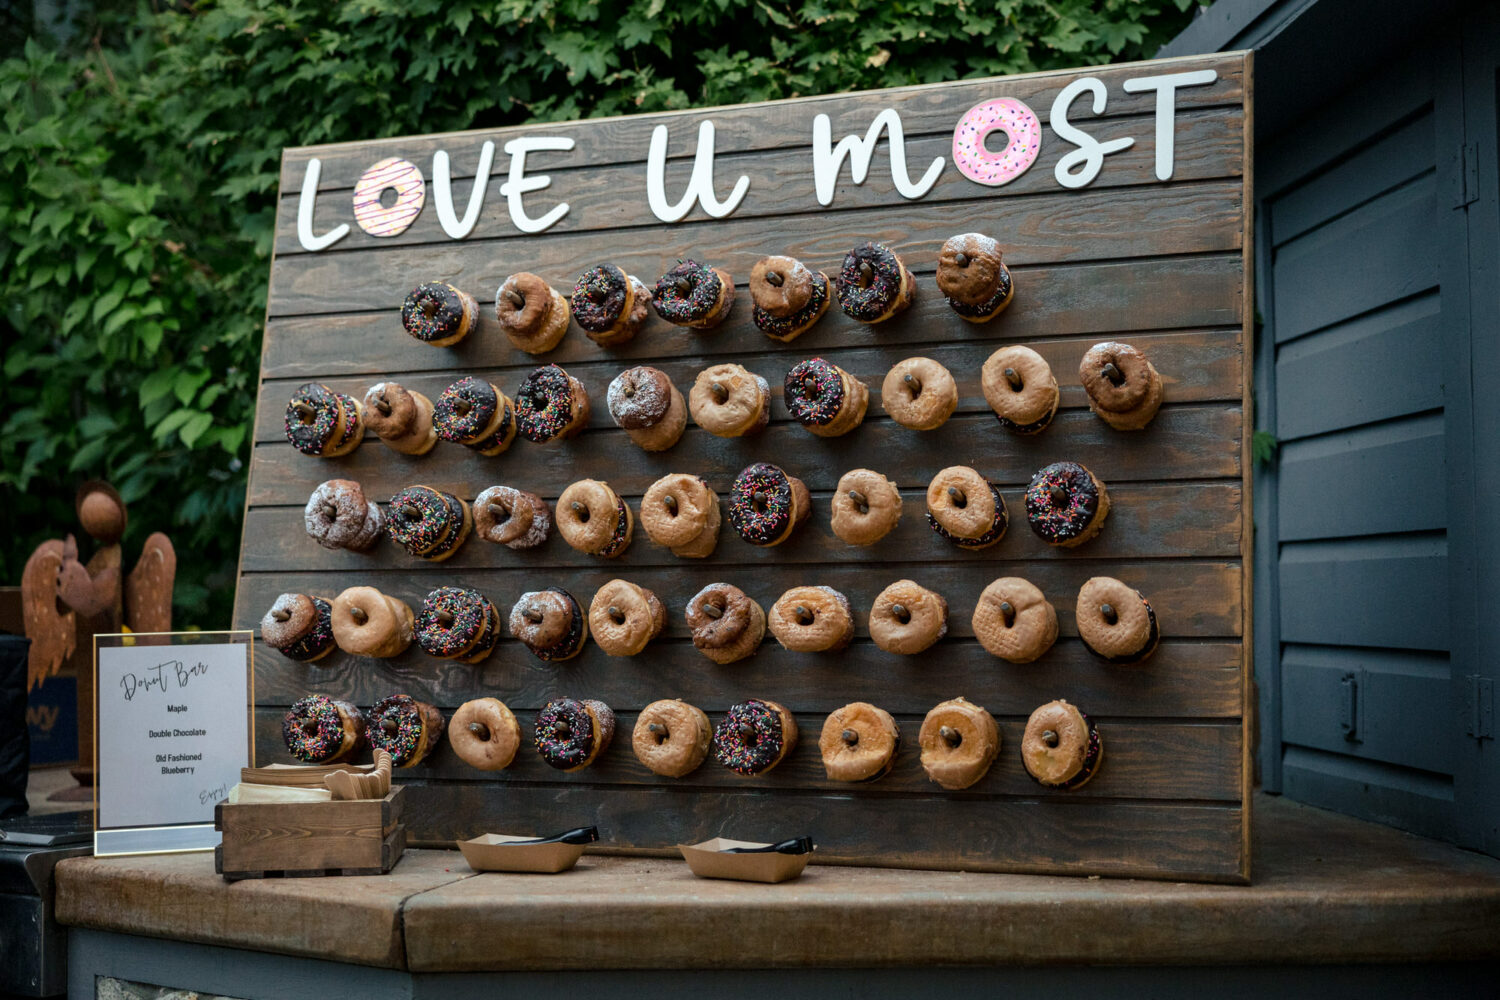 Donut bar with maple, double chocolate, and old-fashioned blueberry donuts on pegs.